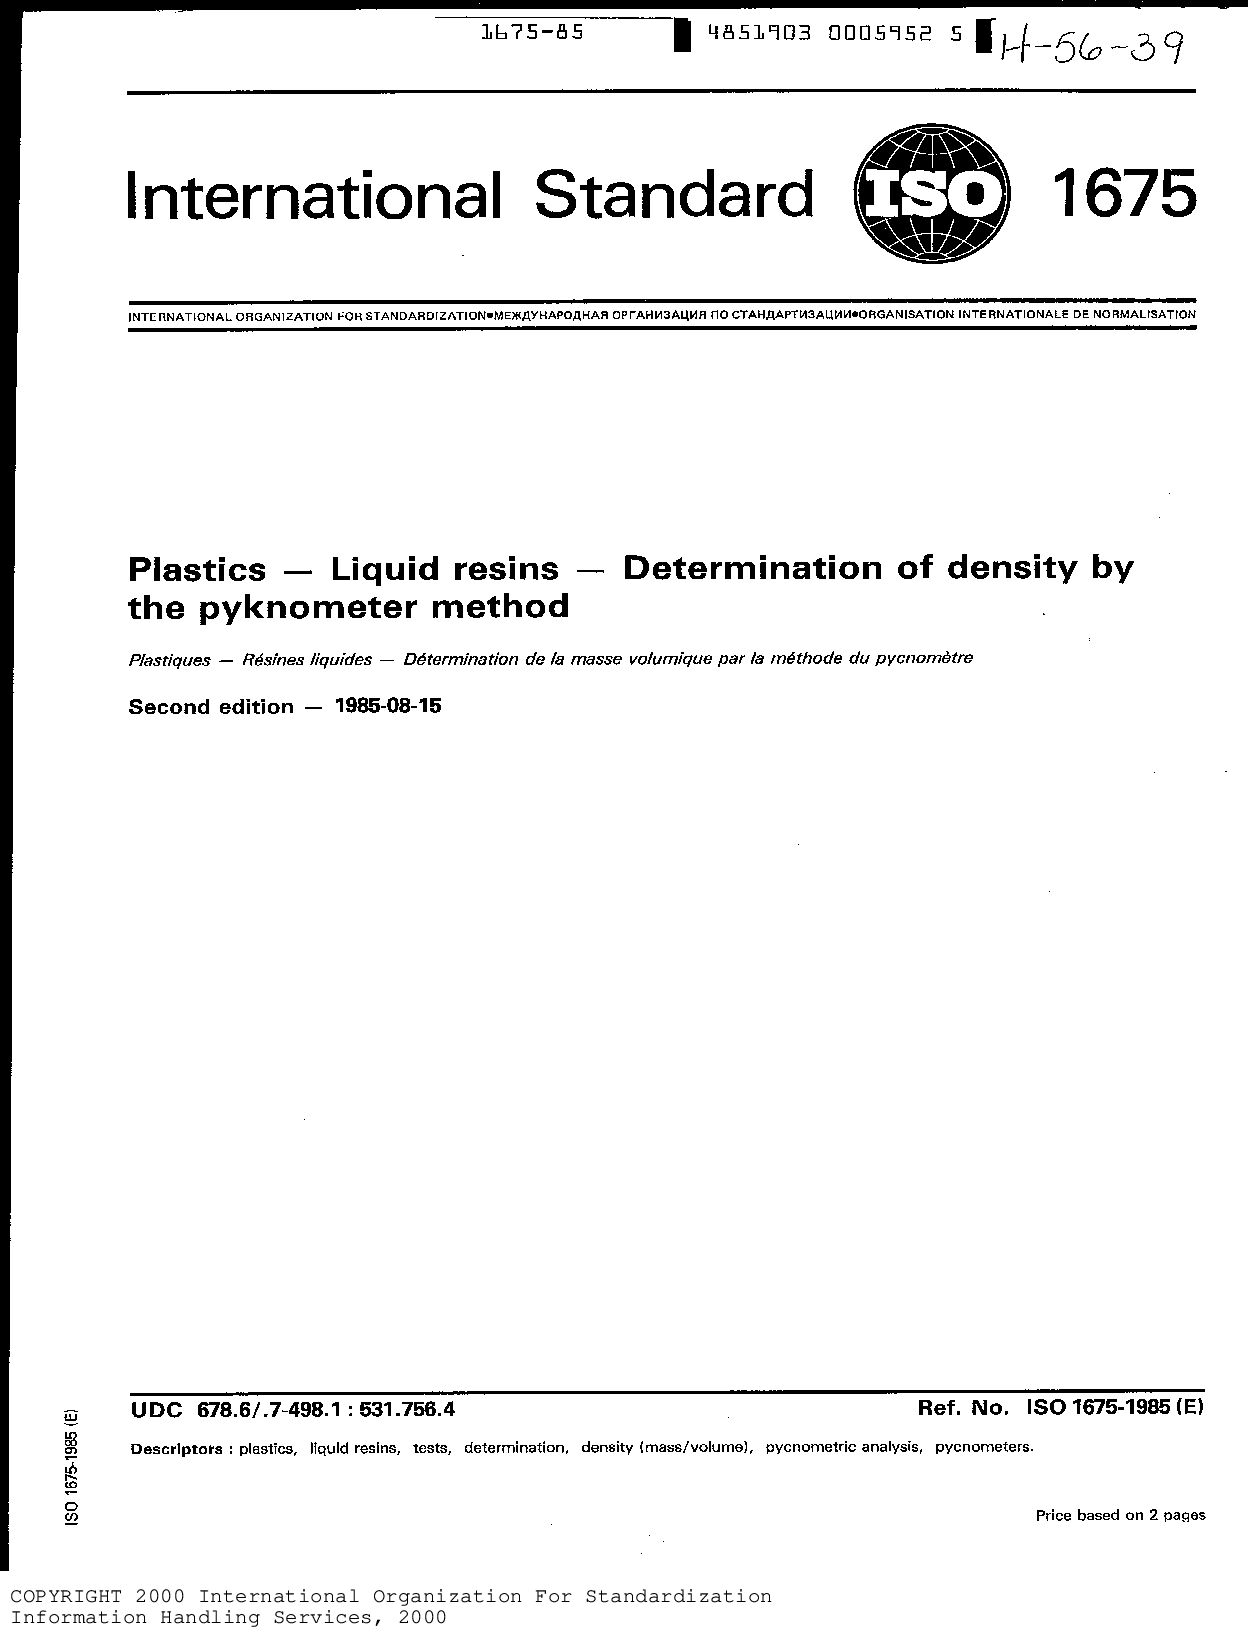 ISO 1675-1985